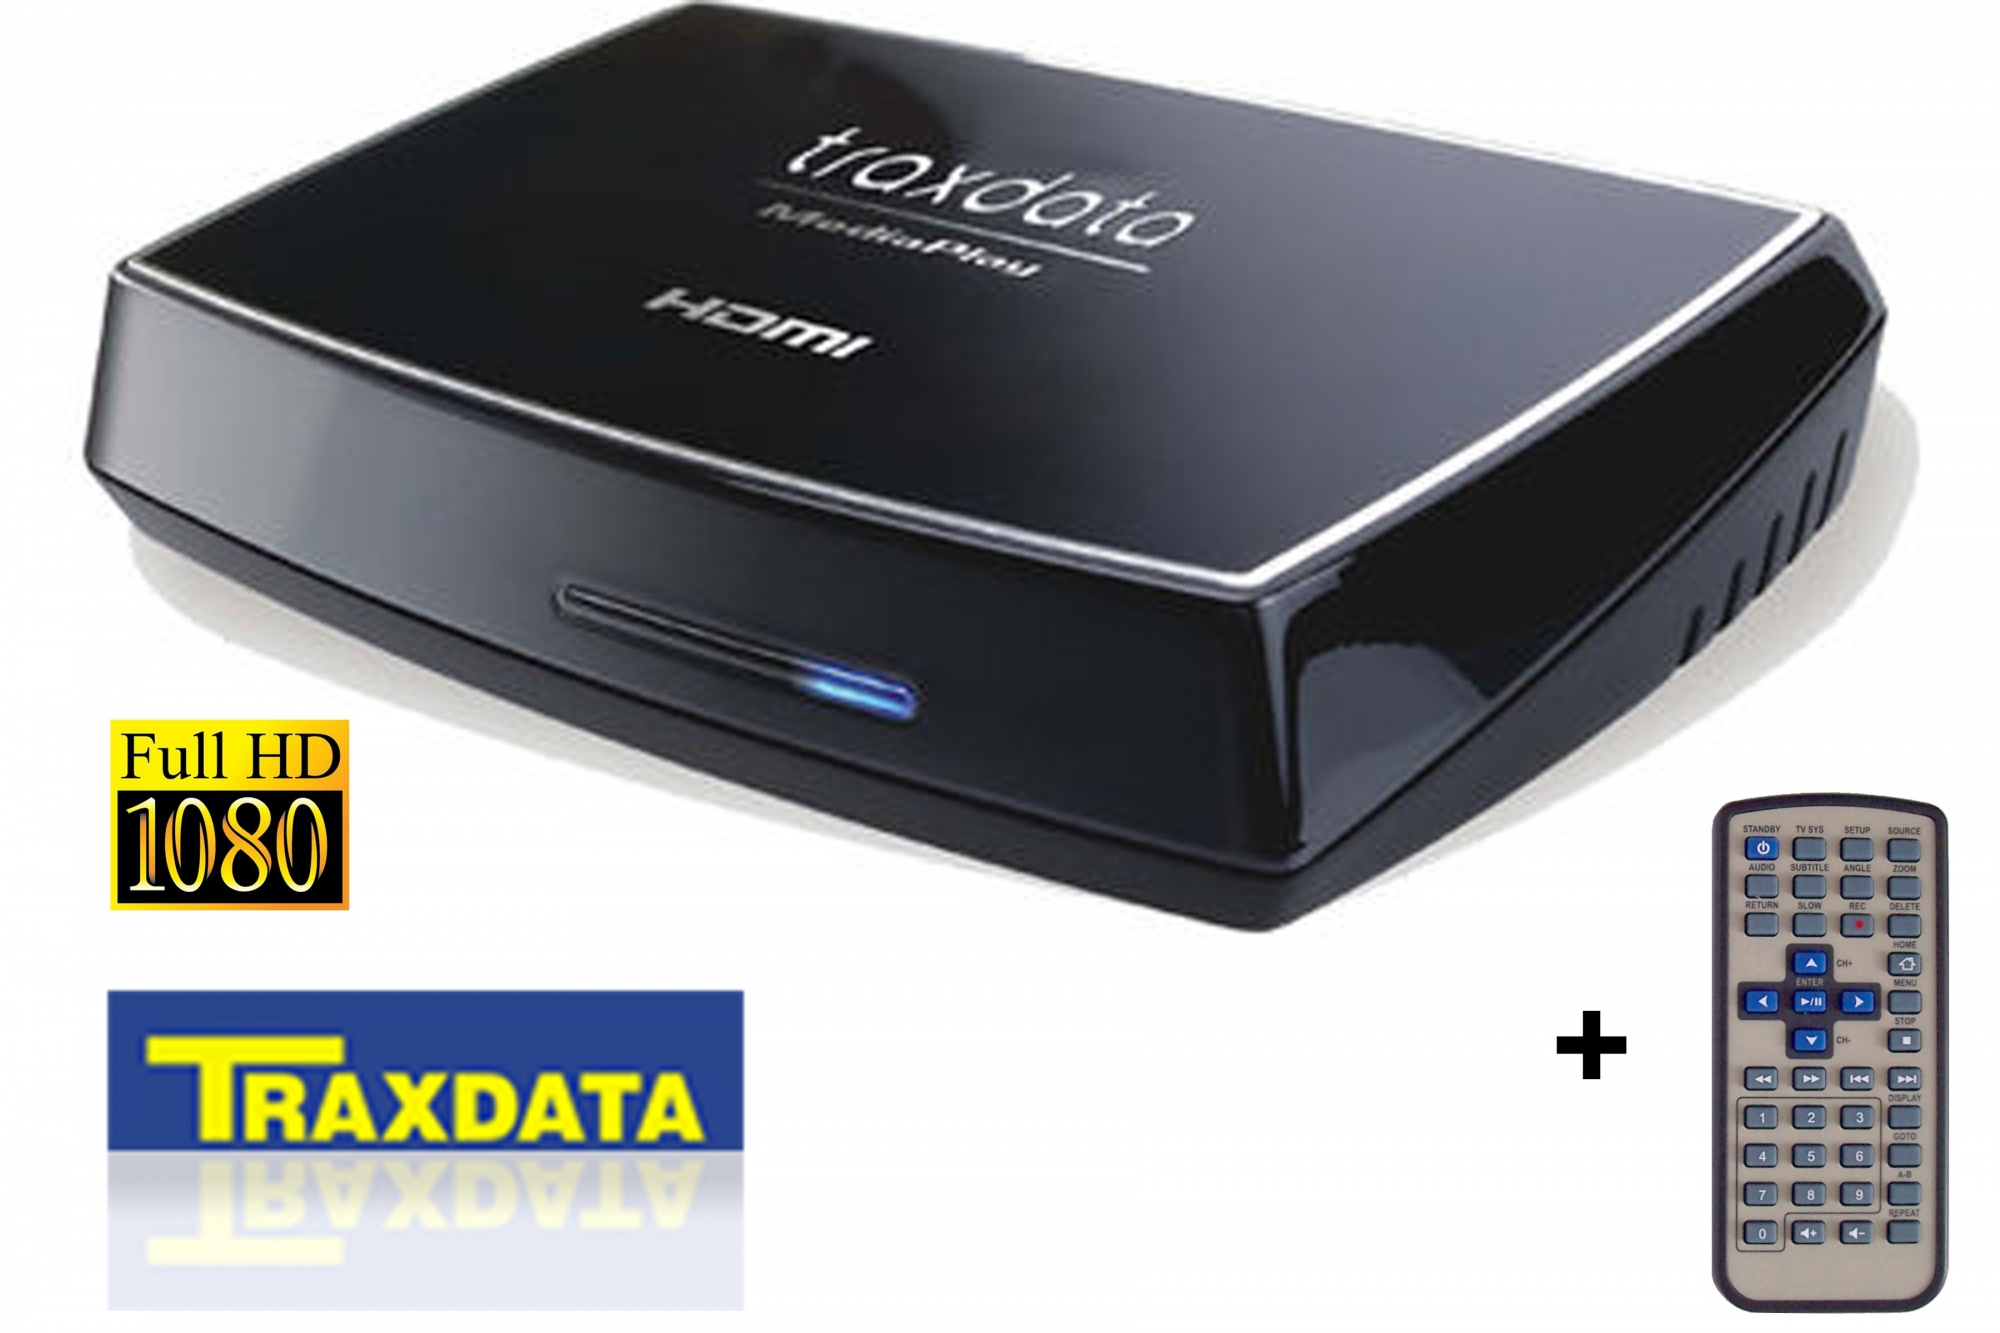 Today's Best Deal - HDMI 1080i Media Player